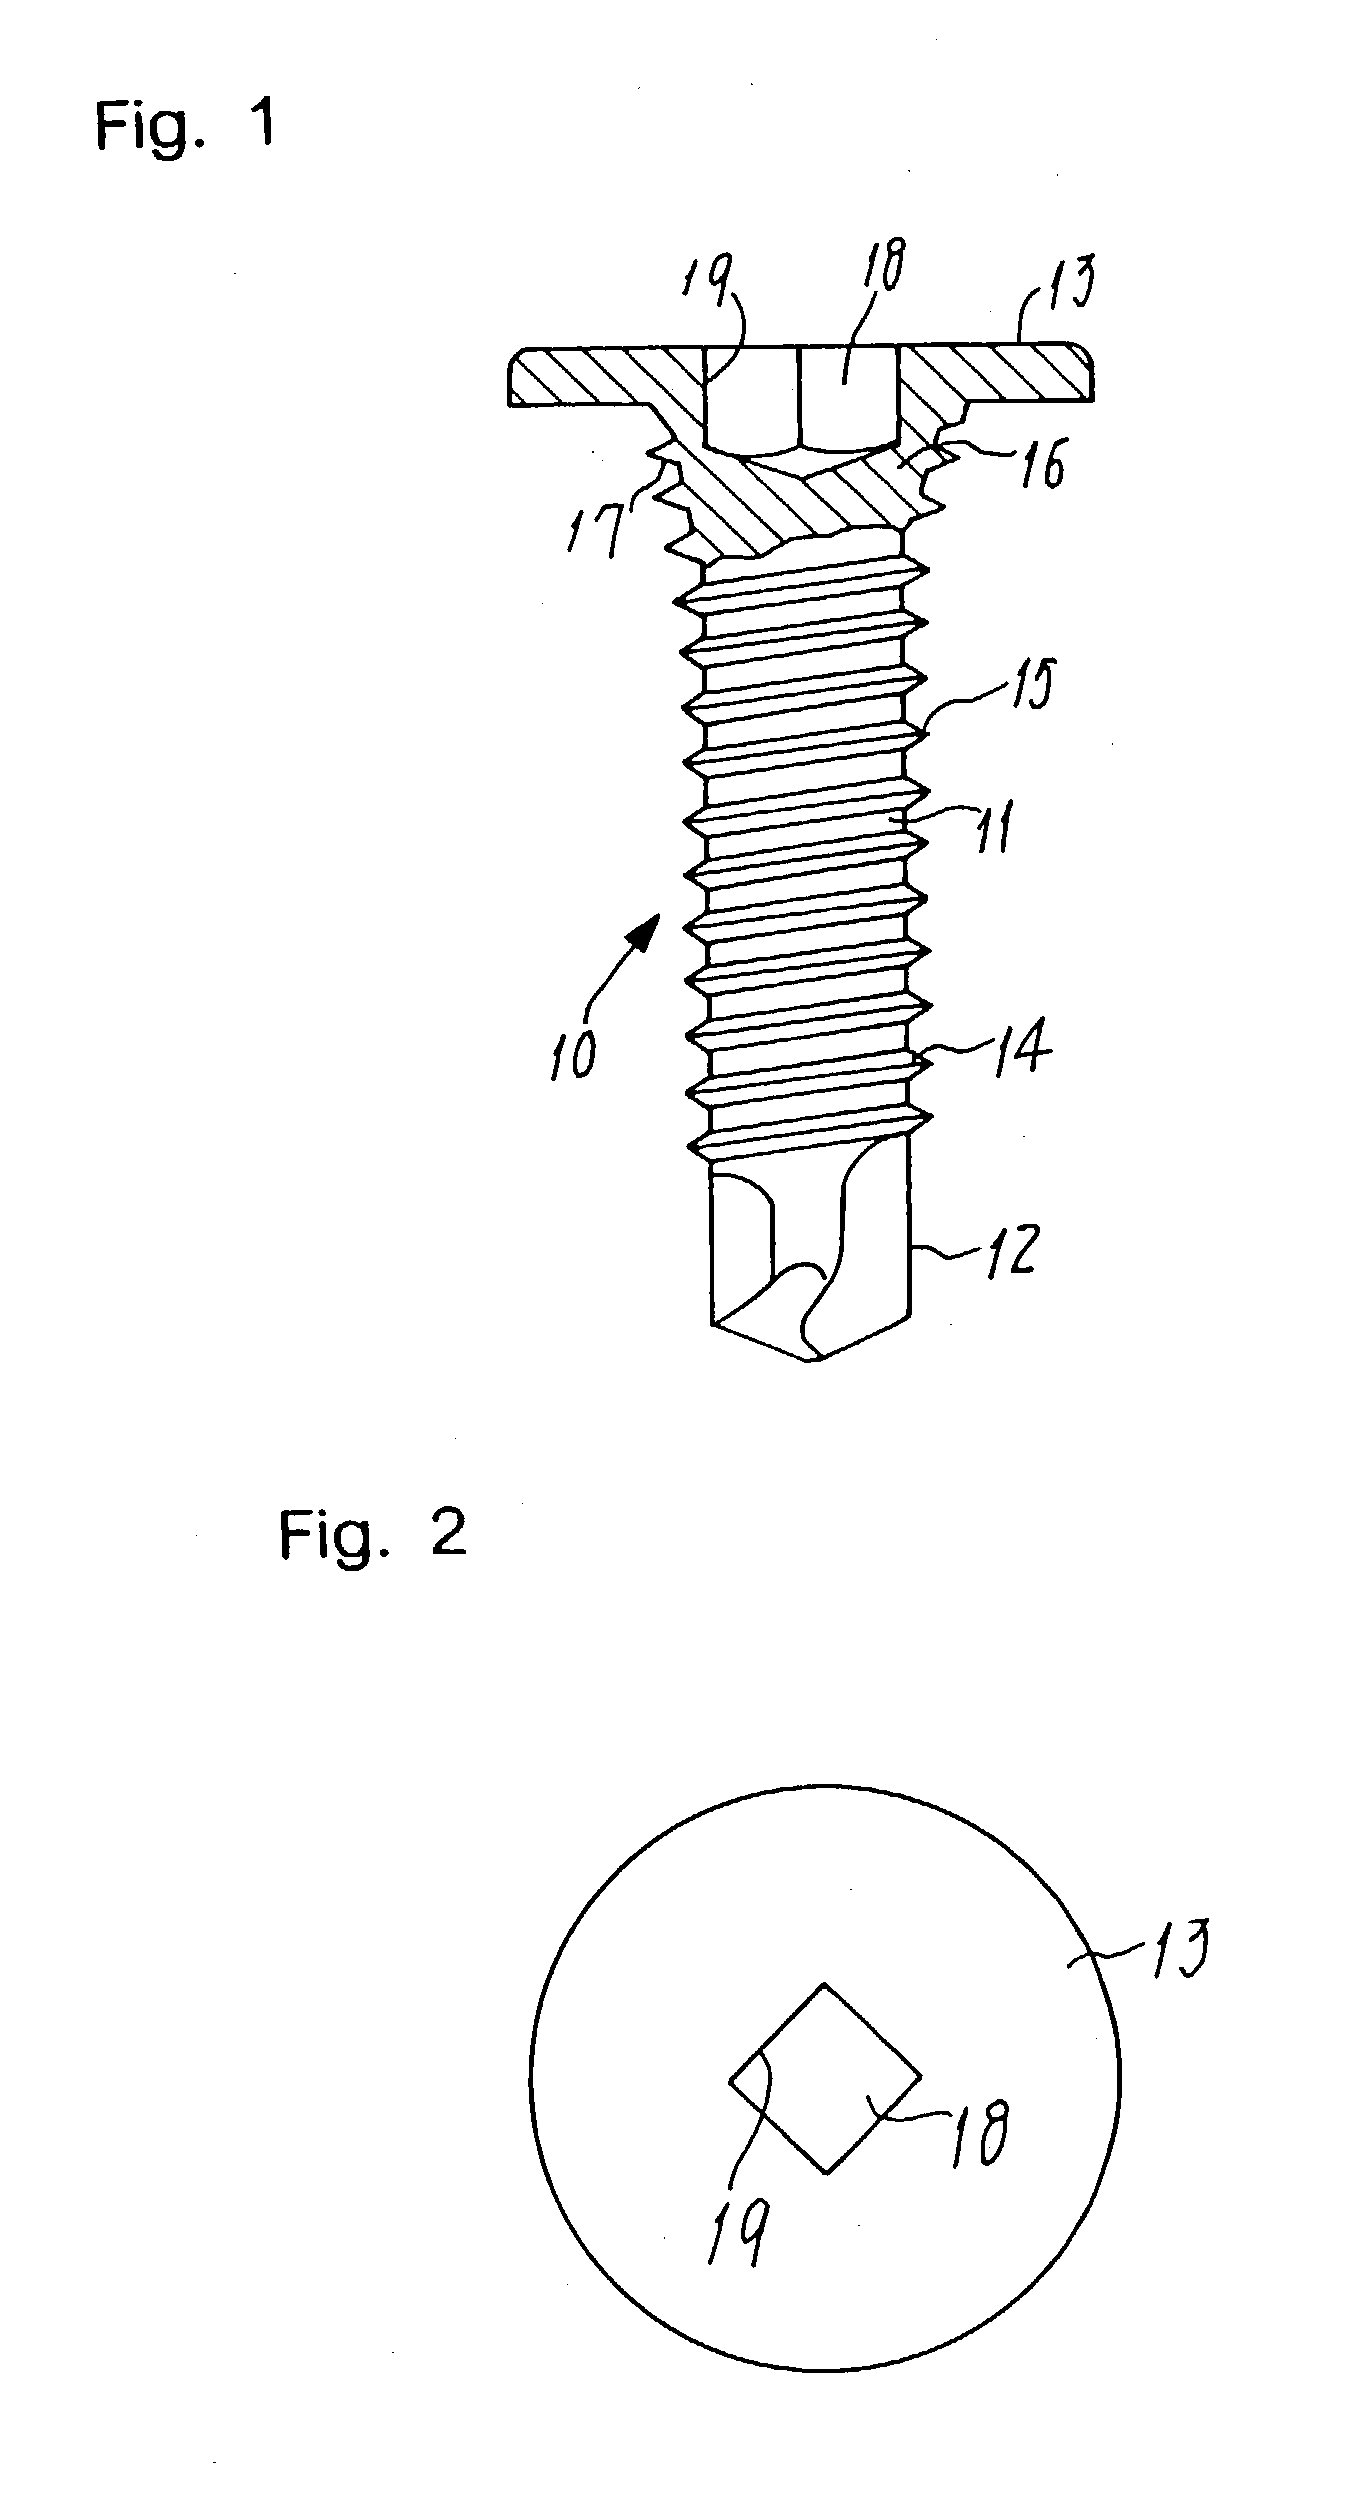 Self-drilling screw for use in steel houses